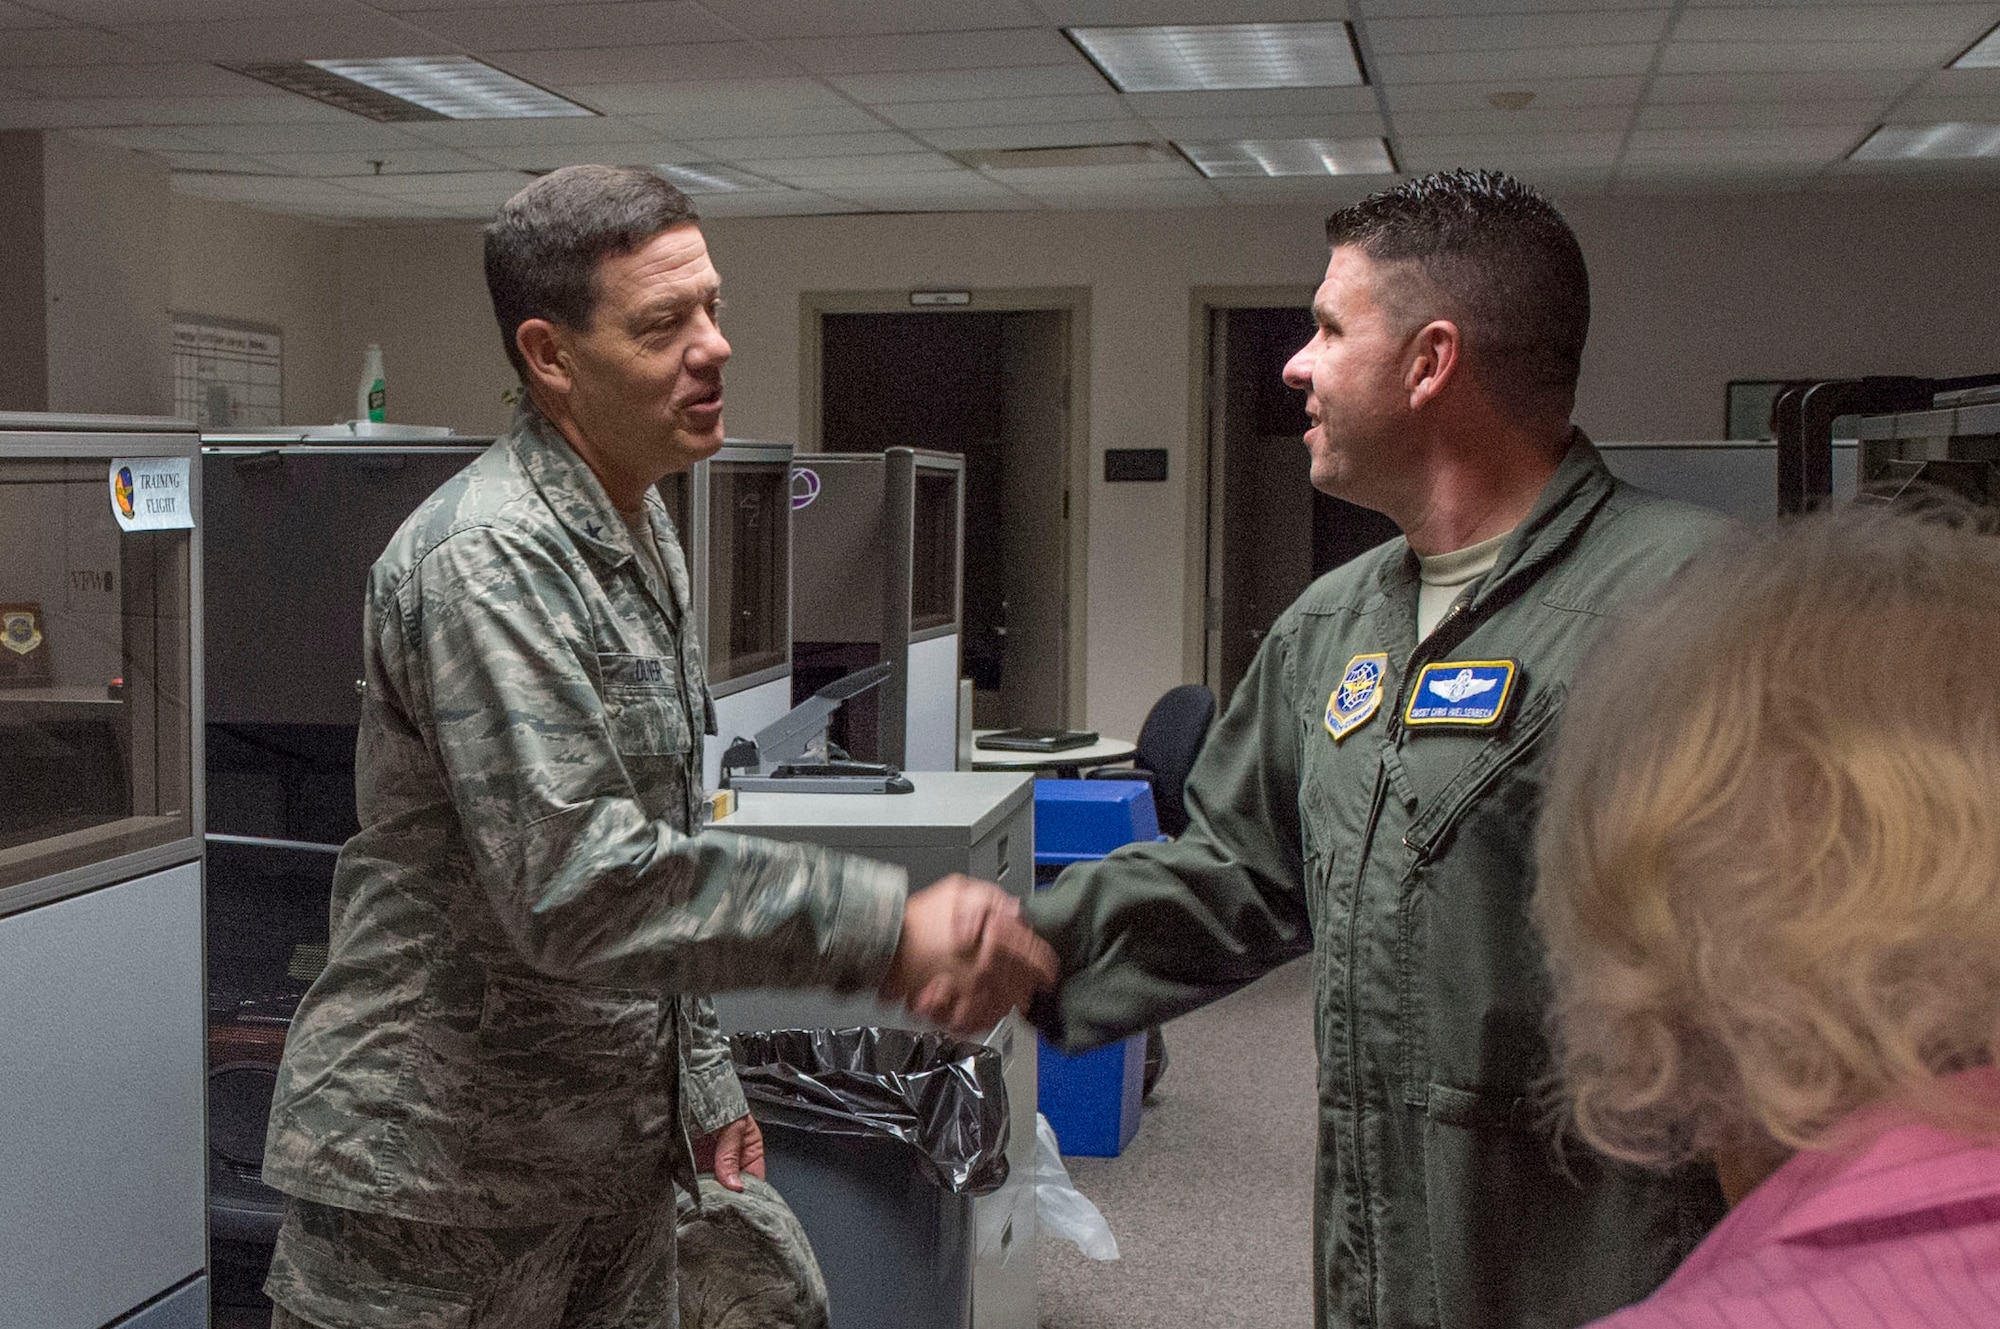 Brig. Gen. Stephen W. Oliver, U.S. Air Force Expeditionary Center vice commander, shakes the hand of Senior Master Sgt. Christopher Huelsenbeck, 621st Air Mobility Operations Squadron superintendent, during a tour of the 621st AMOS during their participation in Exercise Mobility Guardian at Joint Base McGuire-Dix-Lakehurst, N.J., August 1, 2017. The Expeditionary Center is the Air Force's Center of Excellence for advanced combat support training and education, while also providing direct oversight for en route and installation support, contingency response, and building partner capacity mission sets within the global mobility enterprise. (U.S. Air Force photo by Tech. Sgt. Gustavo Gonzalez/RELEASED)